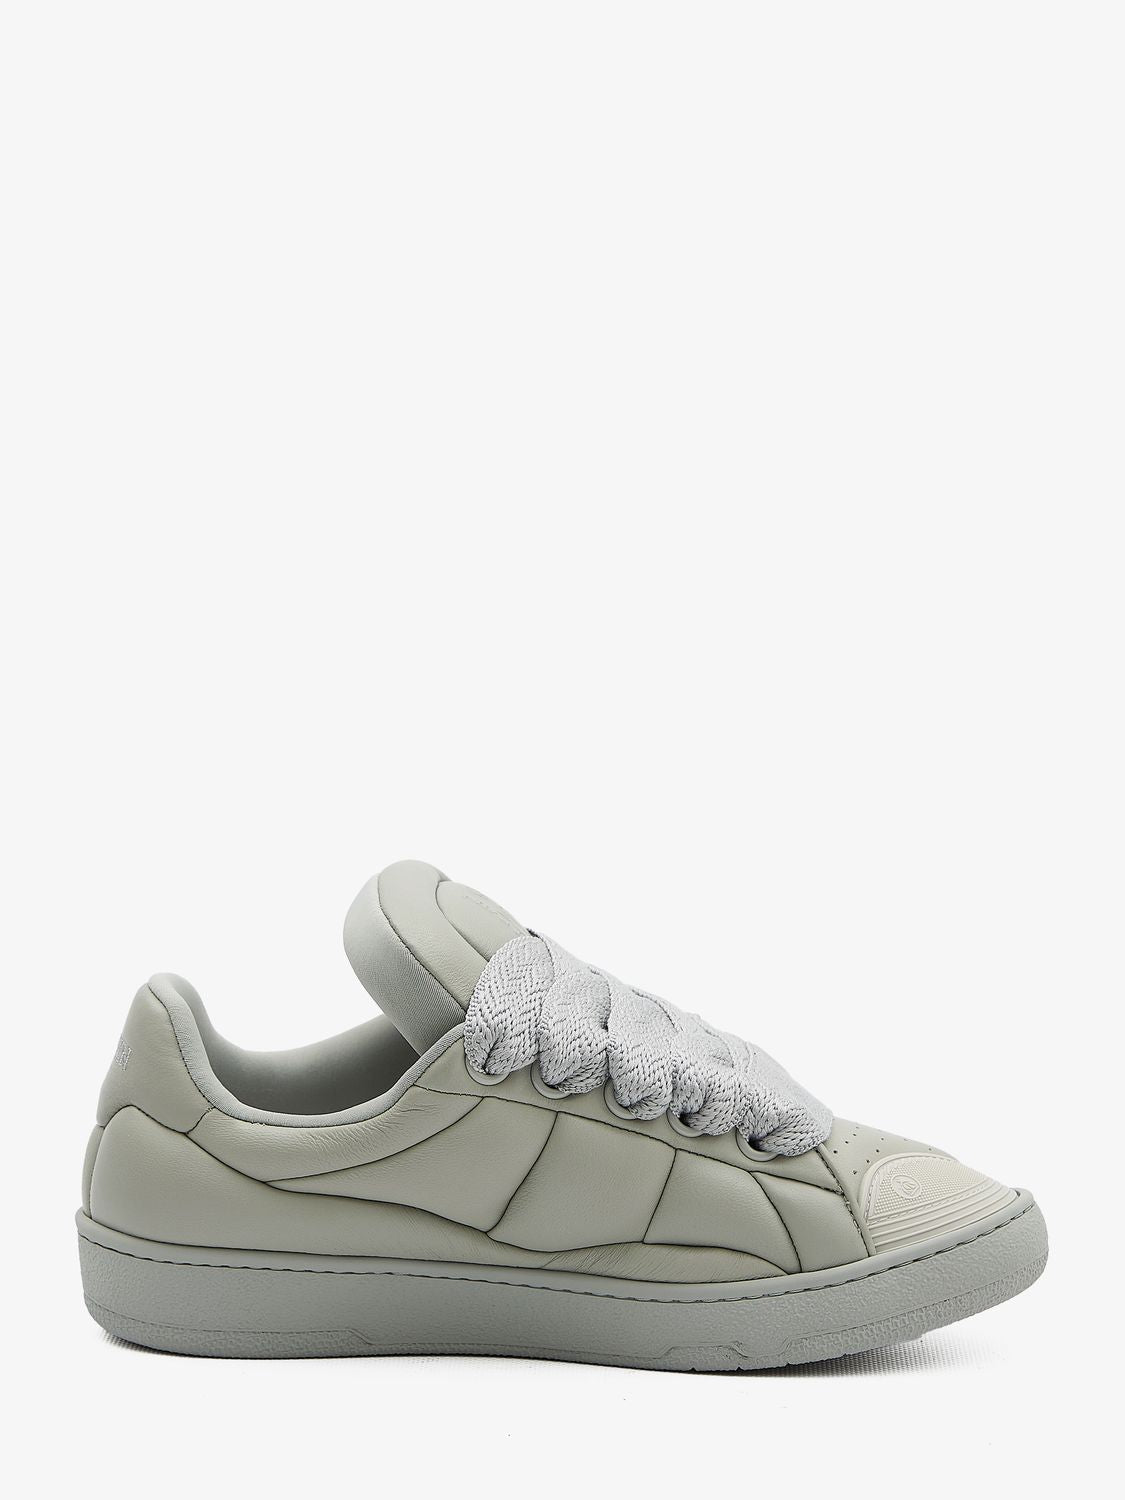 LANVIN Grey Curb XL Low Top Sneakers for Men - FW23 Collection